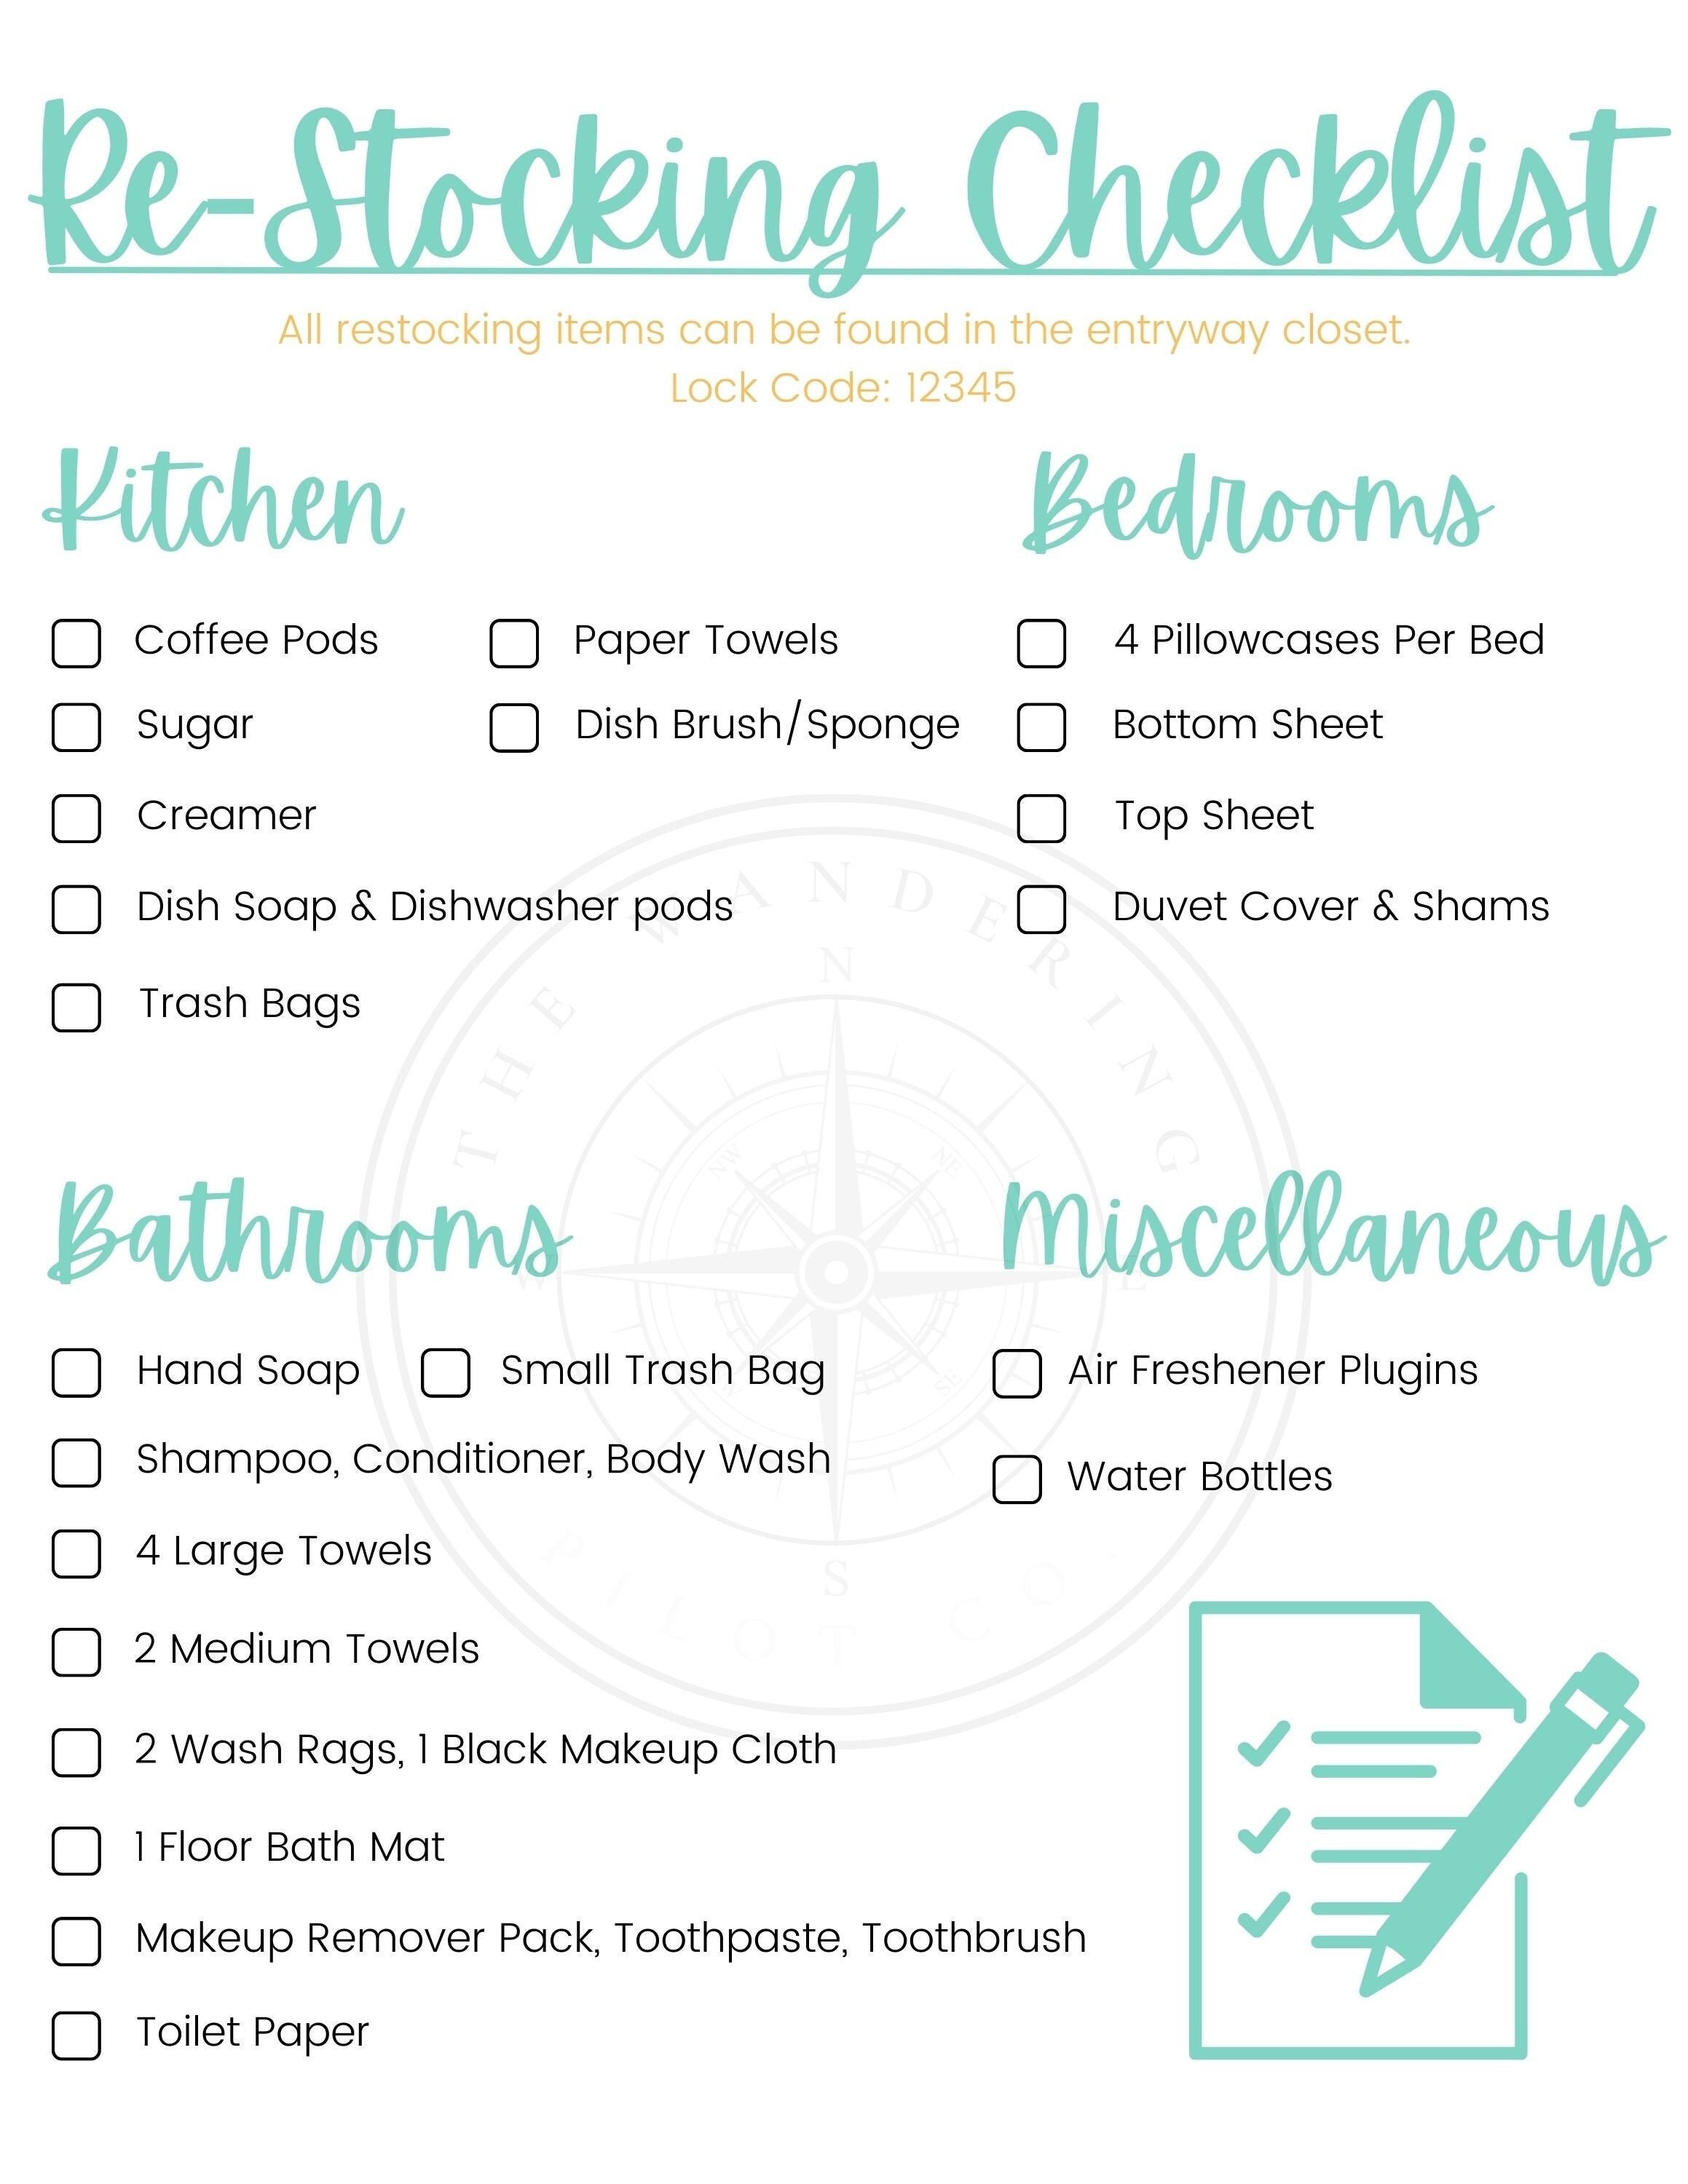 cleaning-printable-airbnb-checklist-template-printable-templates-free